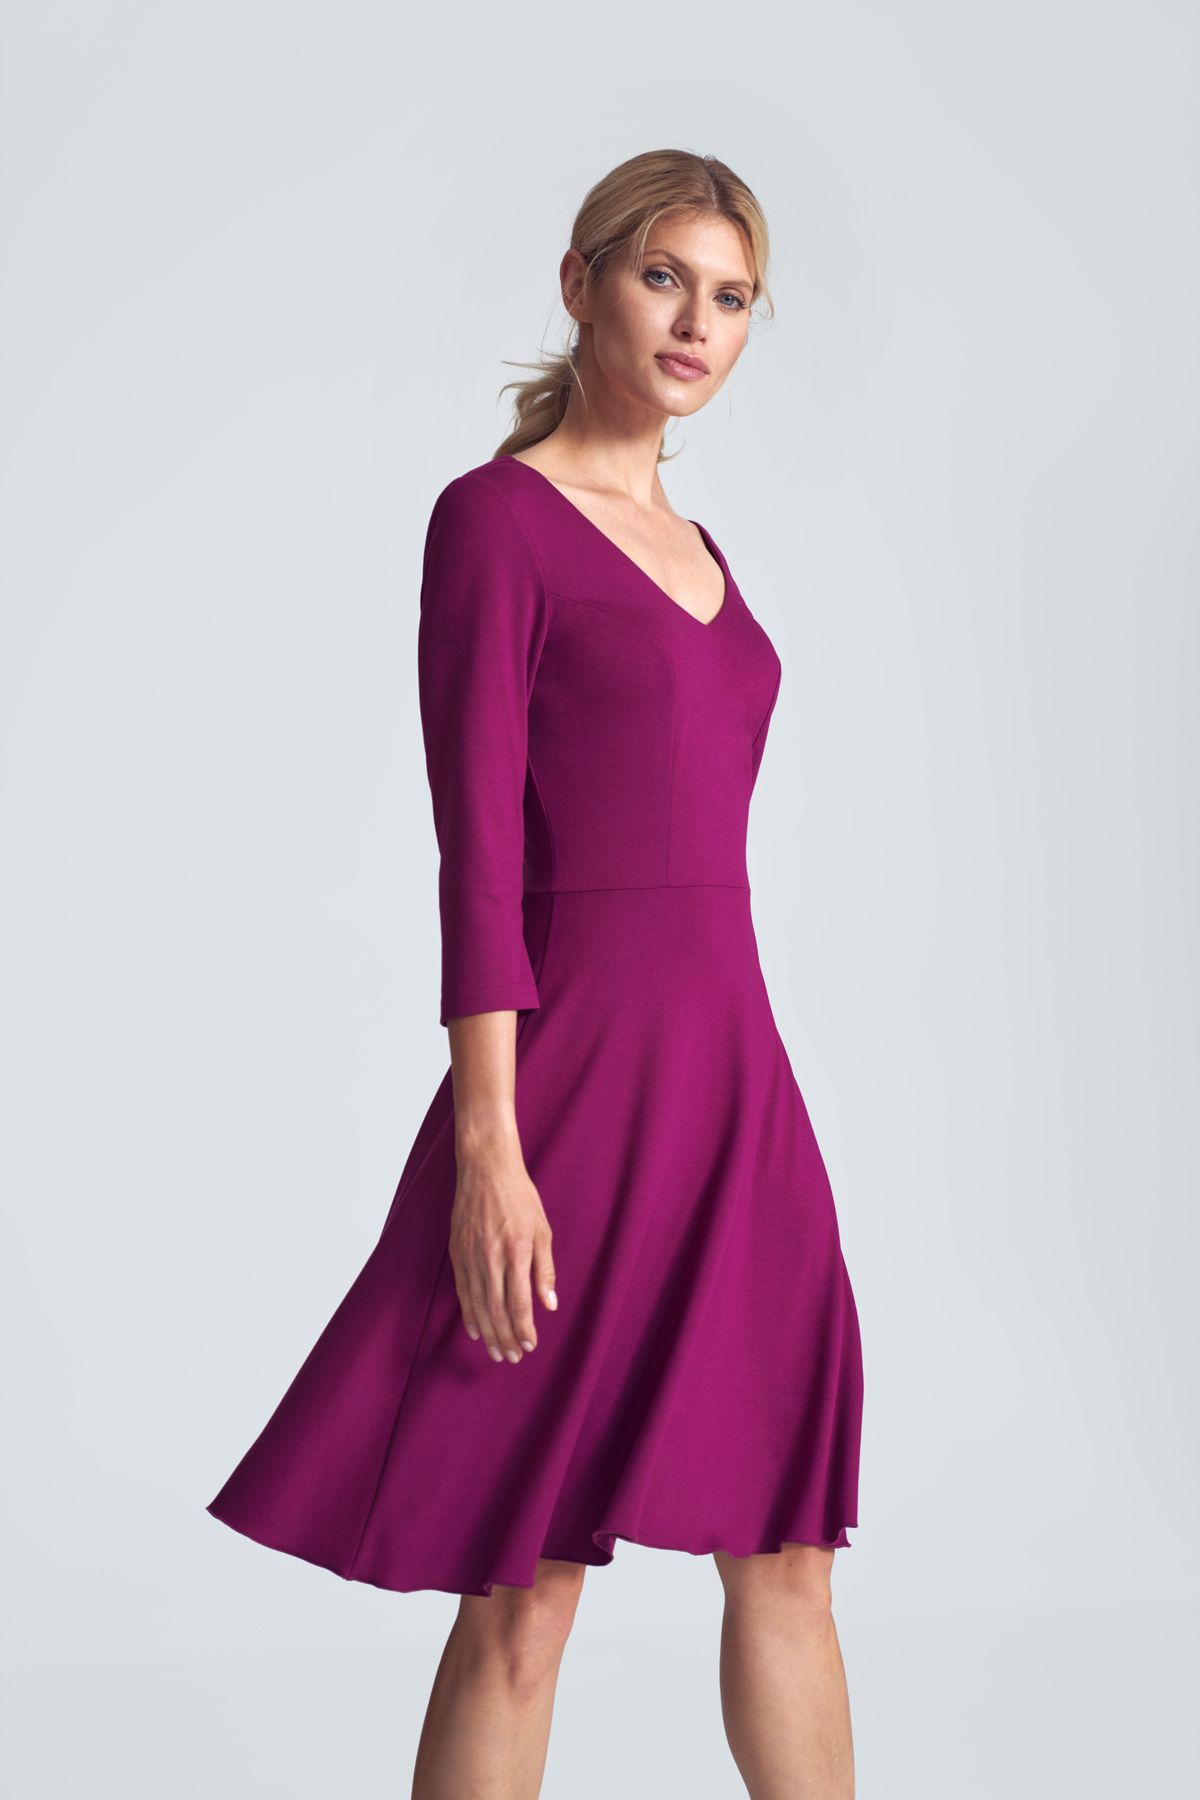 Fuchsia cocktail midi dress with a V-neck, ¾ sleeve, pleats at the bust, sewn at the waist, flared hem. Fastened at the back with a covered zipp.